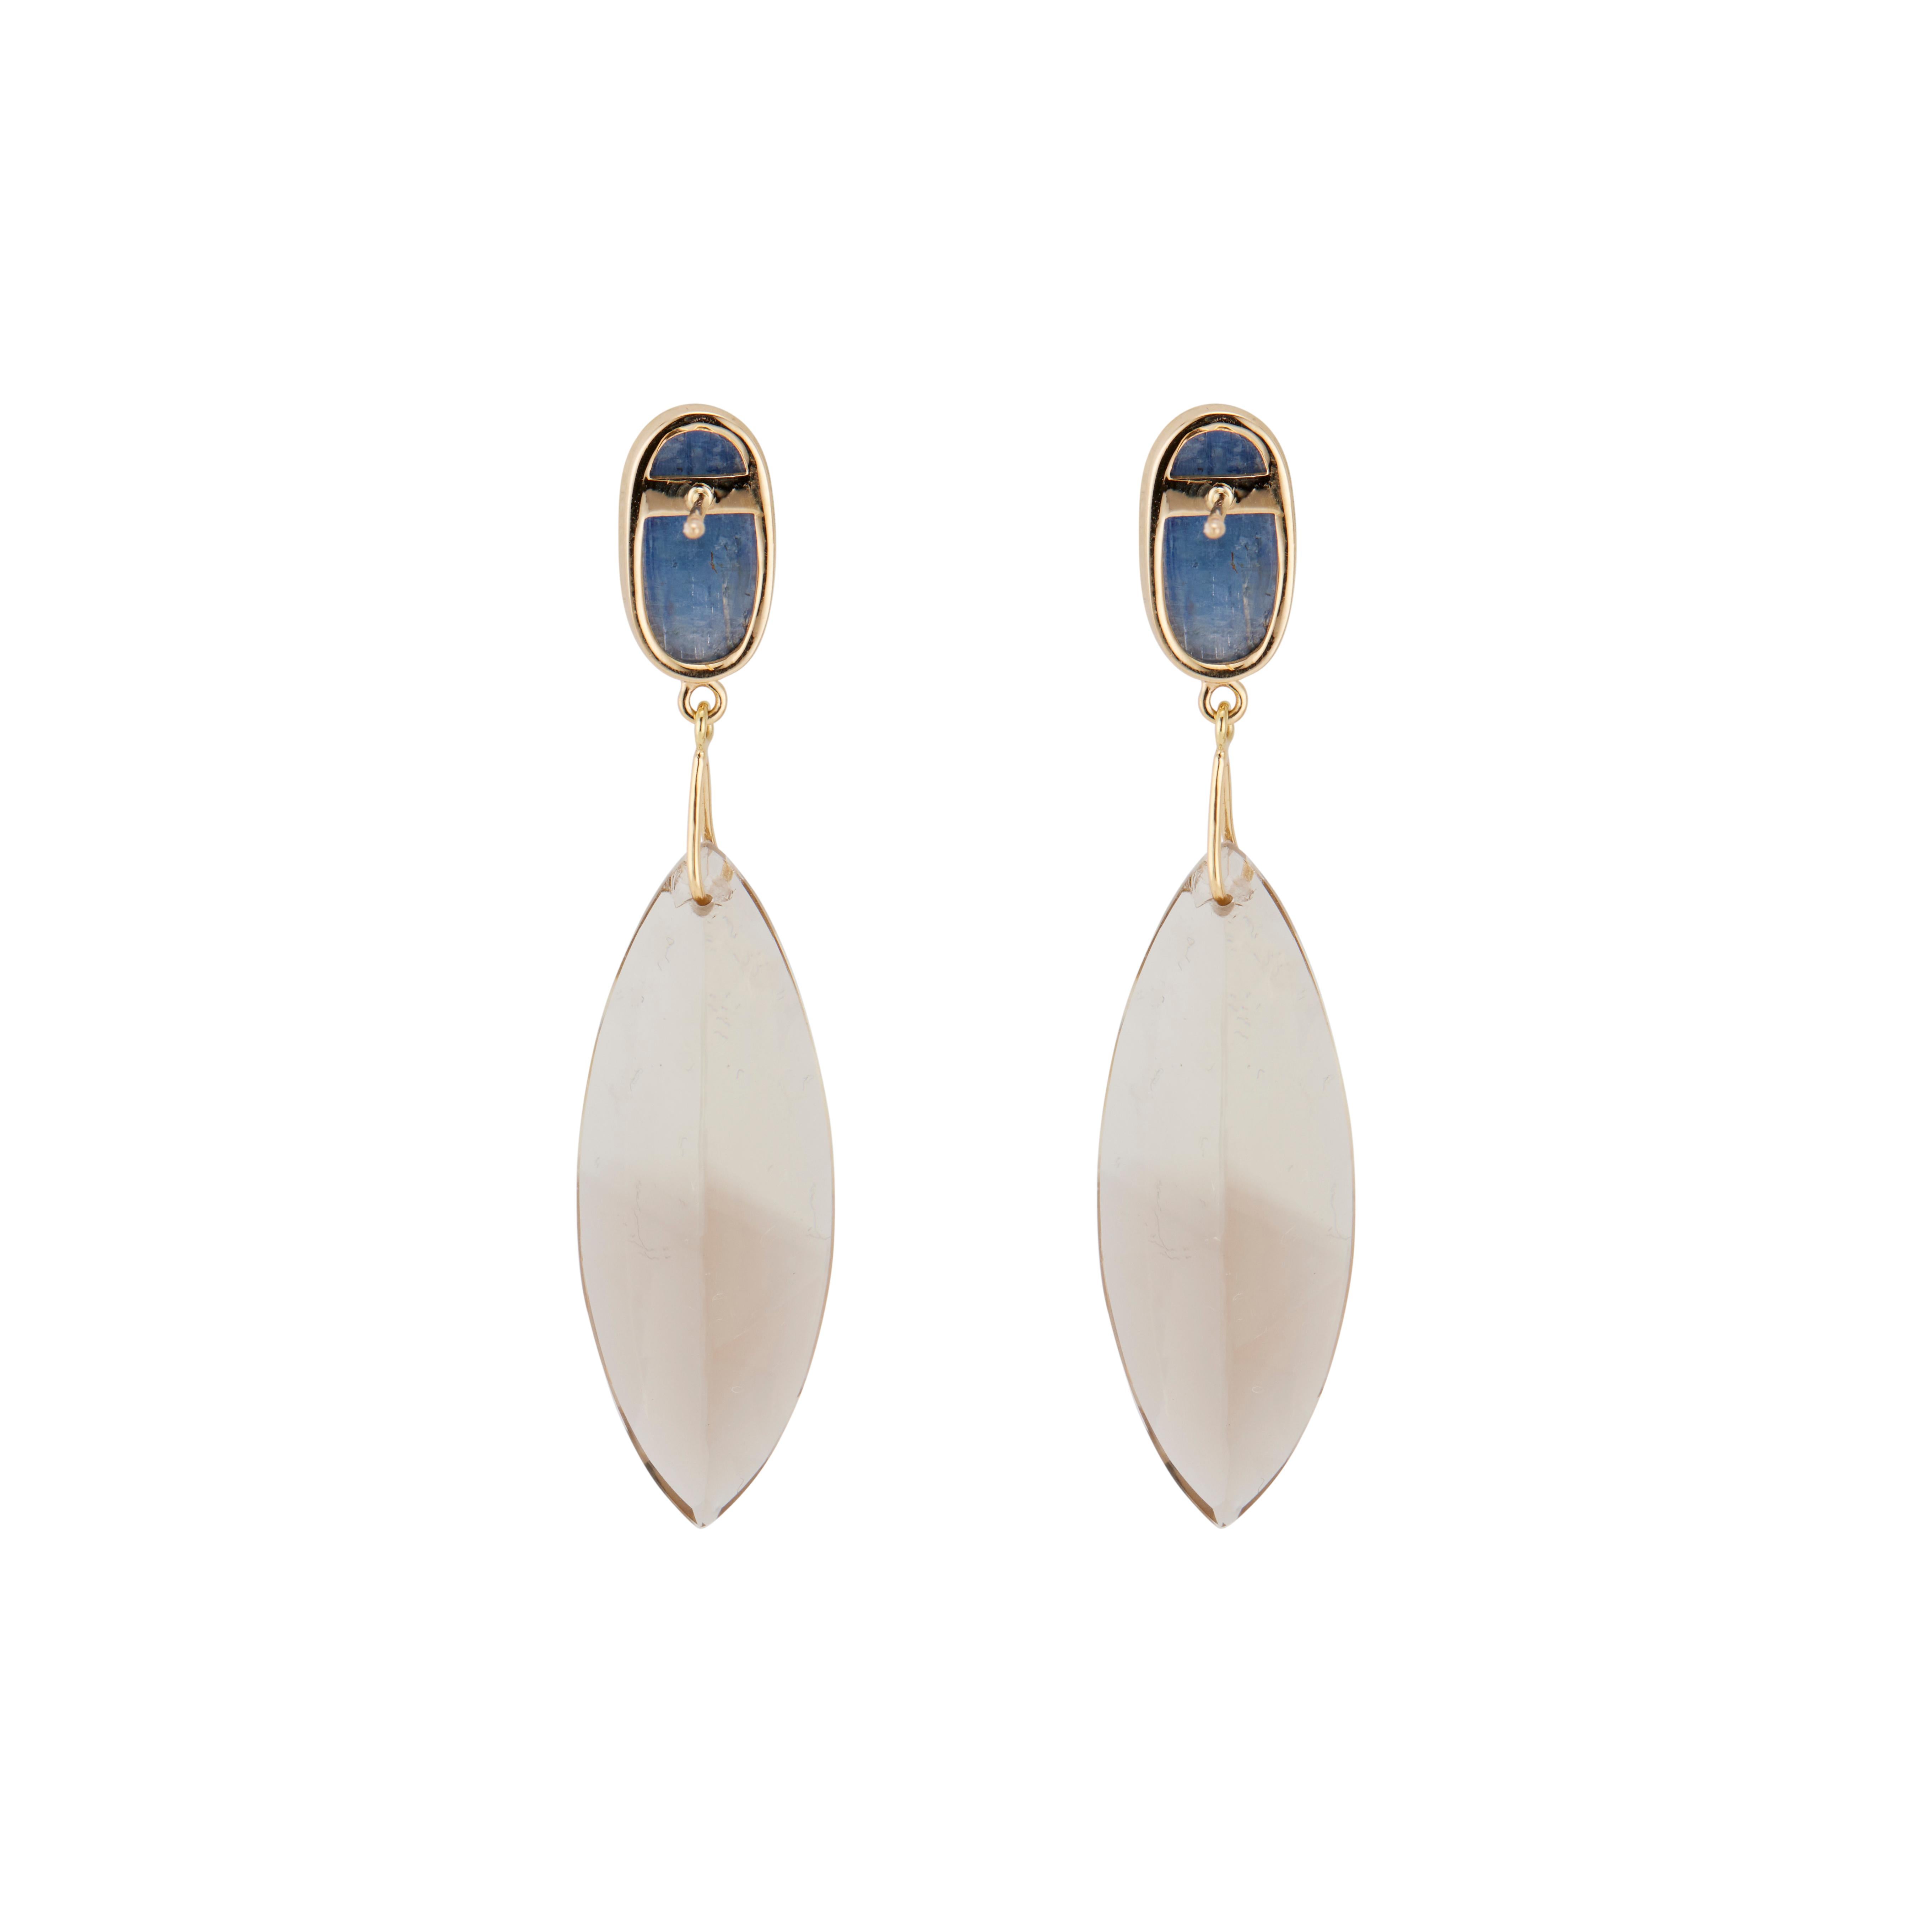 Diamond and quartz dangle earrings. 2 blue oval cabochon bezel set Cyanite, set in 14k yellow gold with two smoky quartz dangles. Designed and crafted in the Peter Suchy workshop. Note, these earring are very hard to photograph, picture three (side